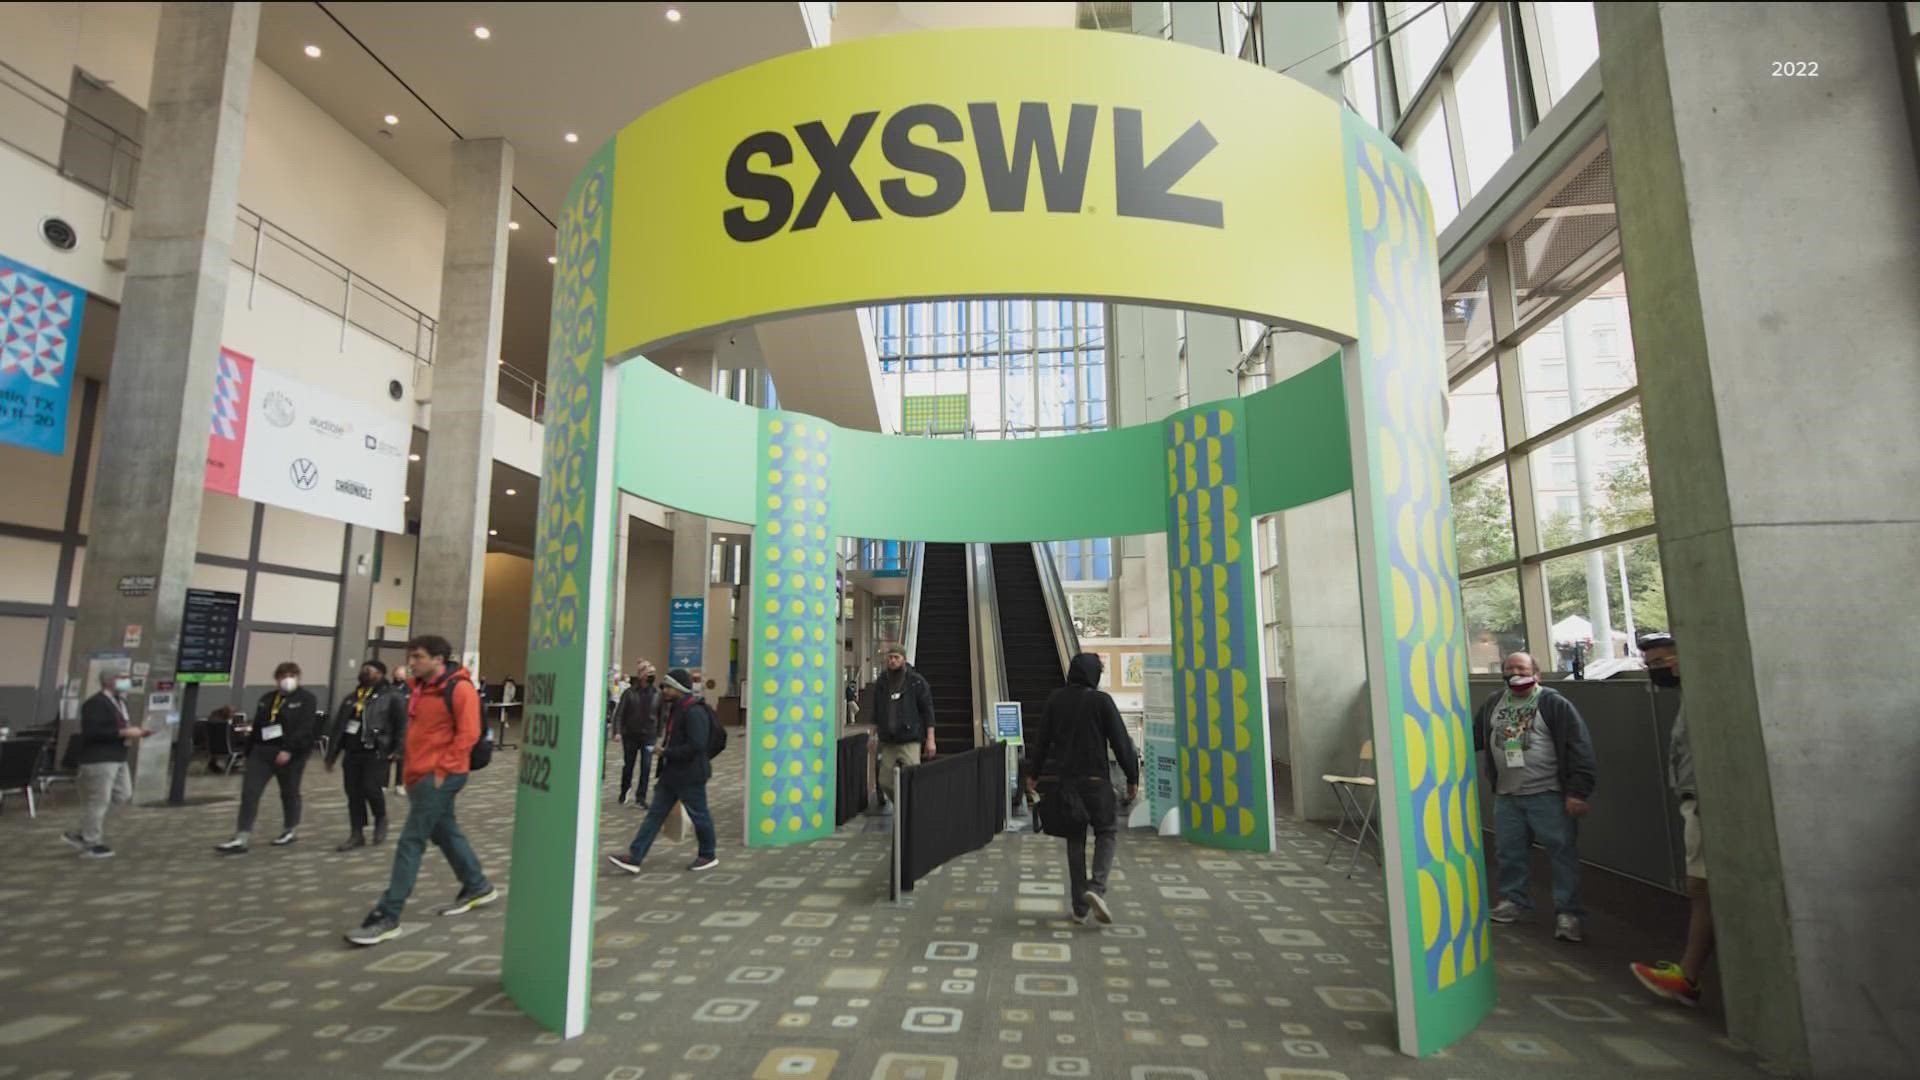 South by Southwest will host a second festival in Australia starting in 2023.